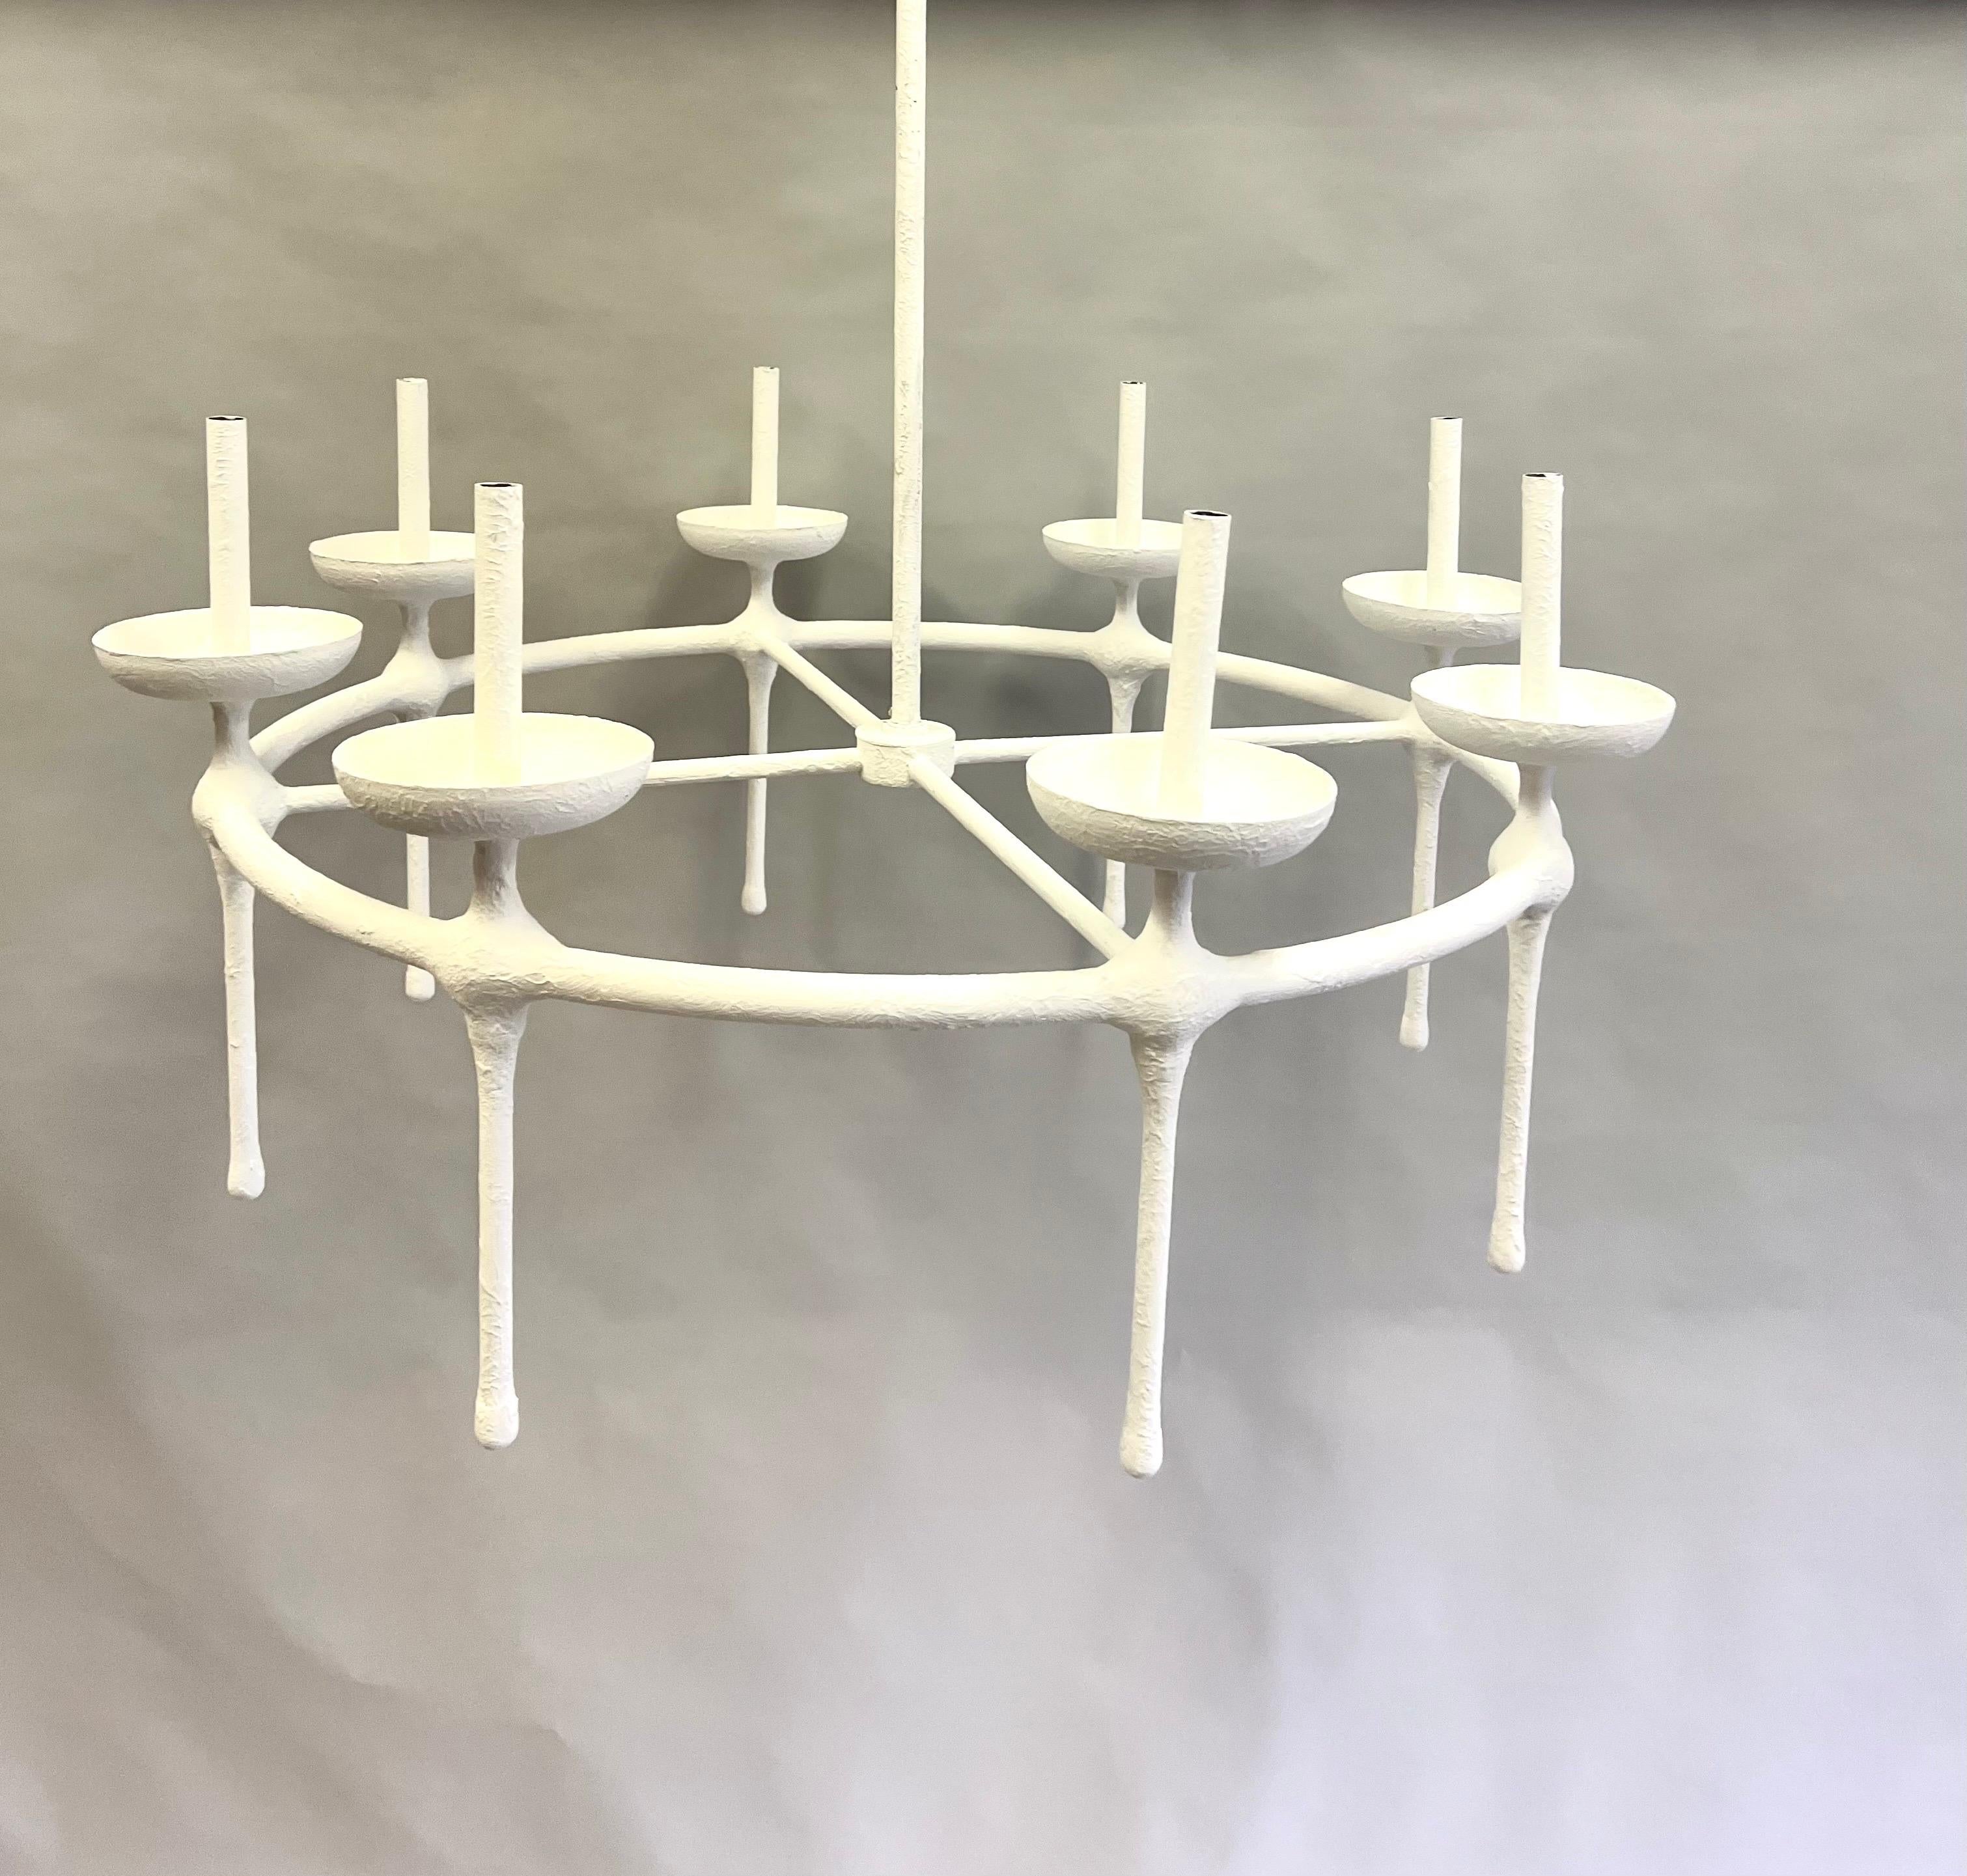 20th Century French, Modern Neoclassical Plaster Chandelier in the Style of Diego Giacometti For Sale